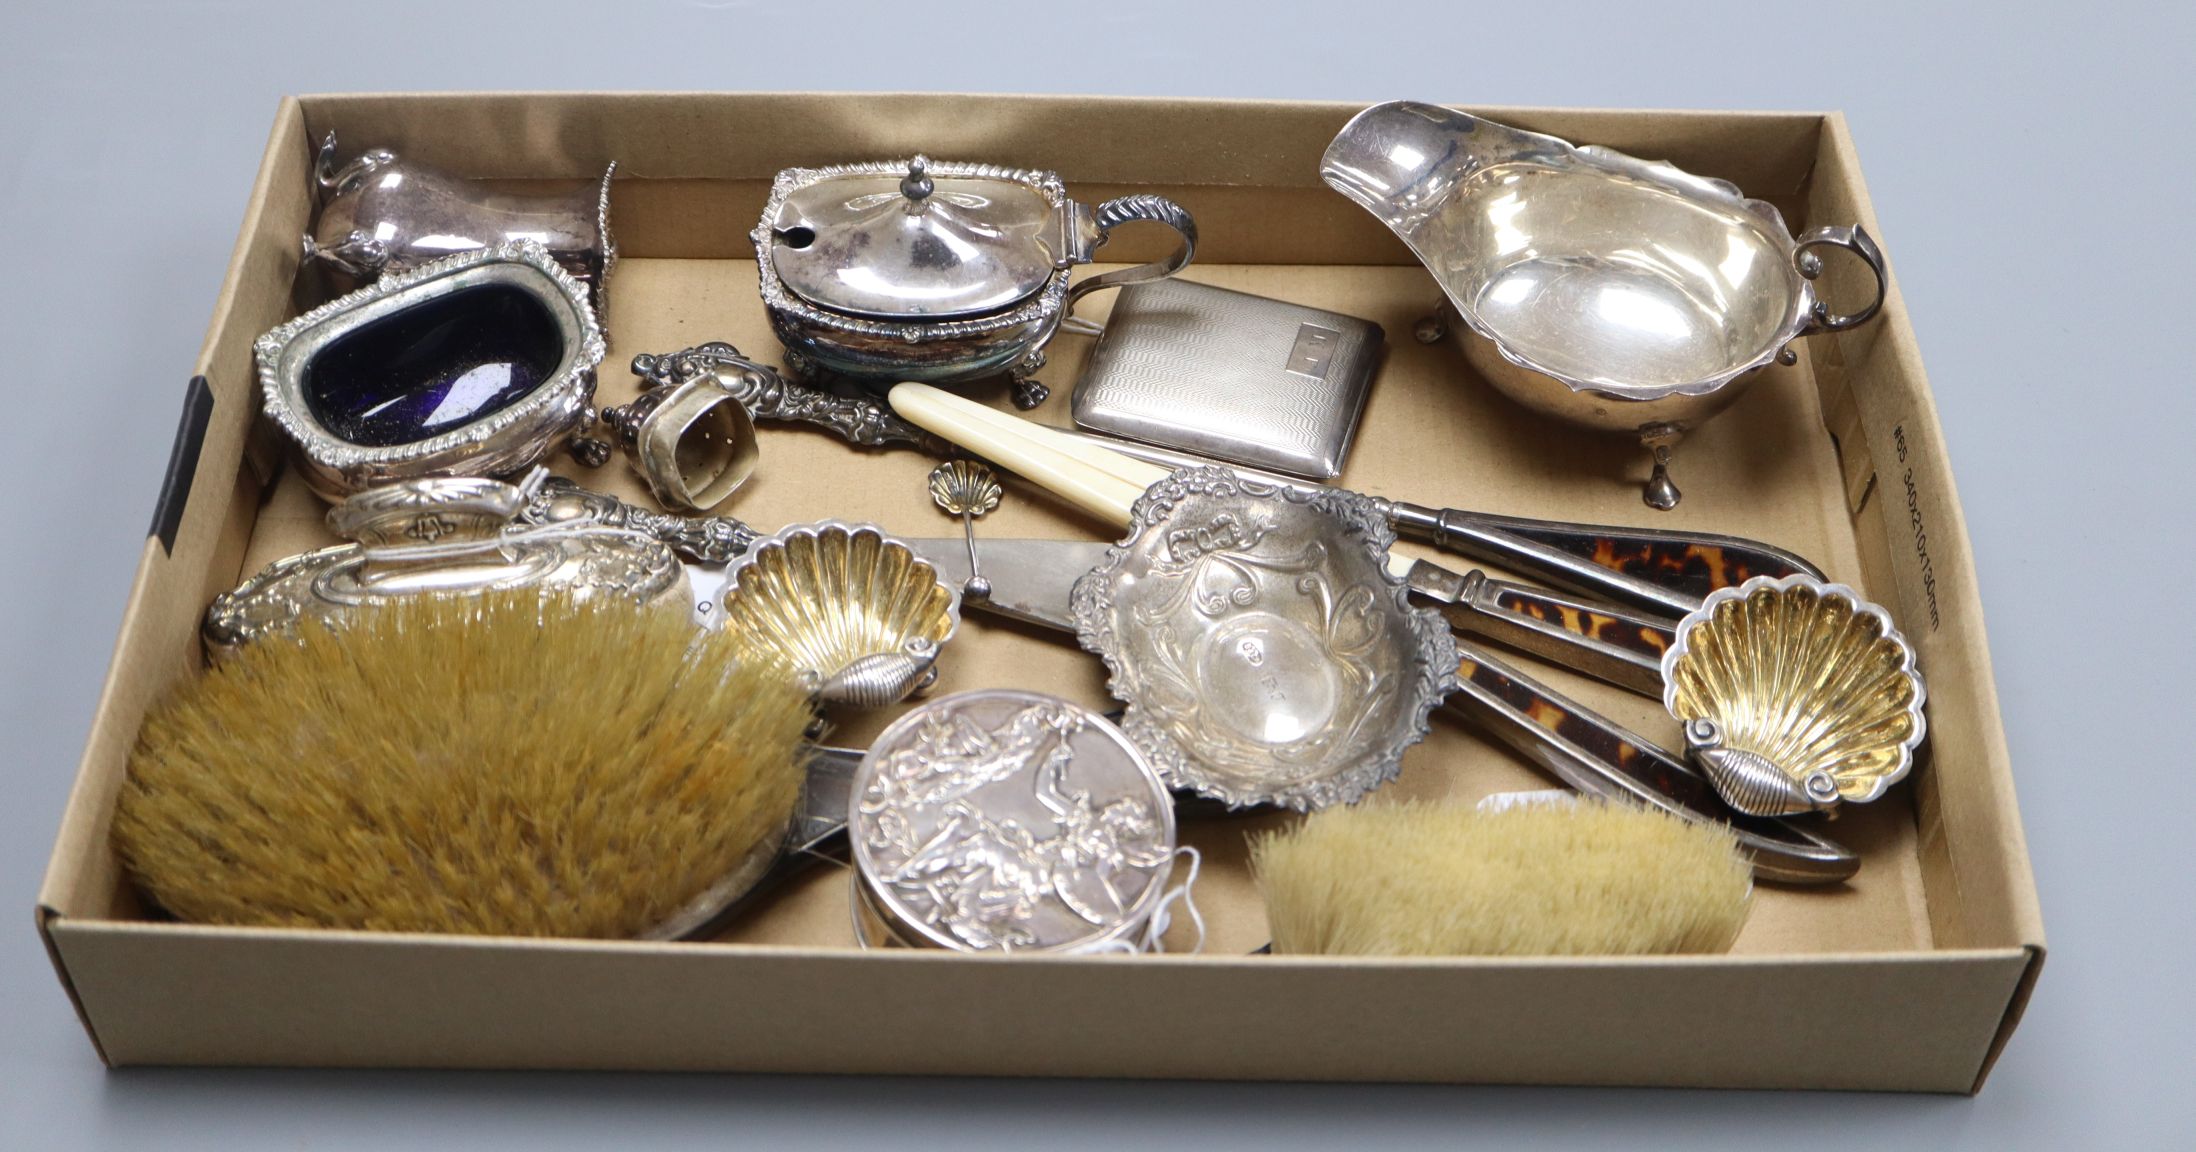 A small collection of silver, silver-mounted and plated items.